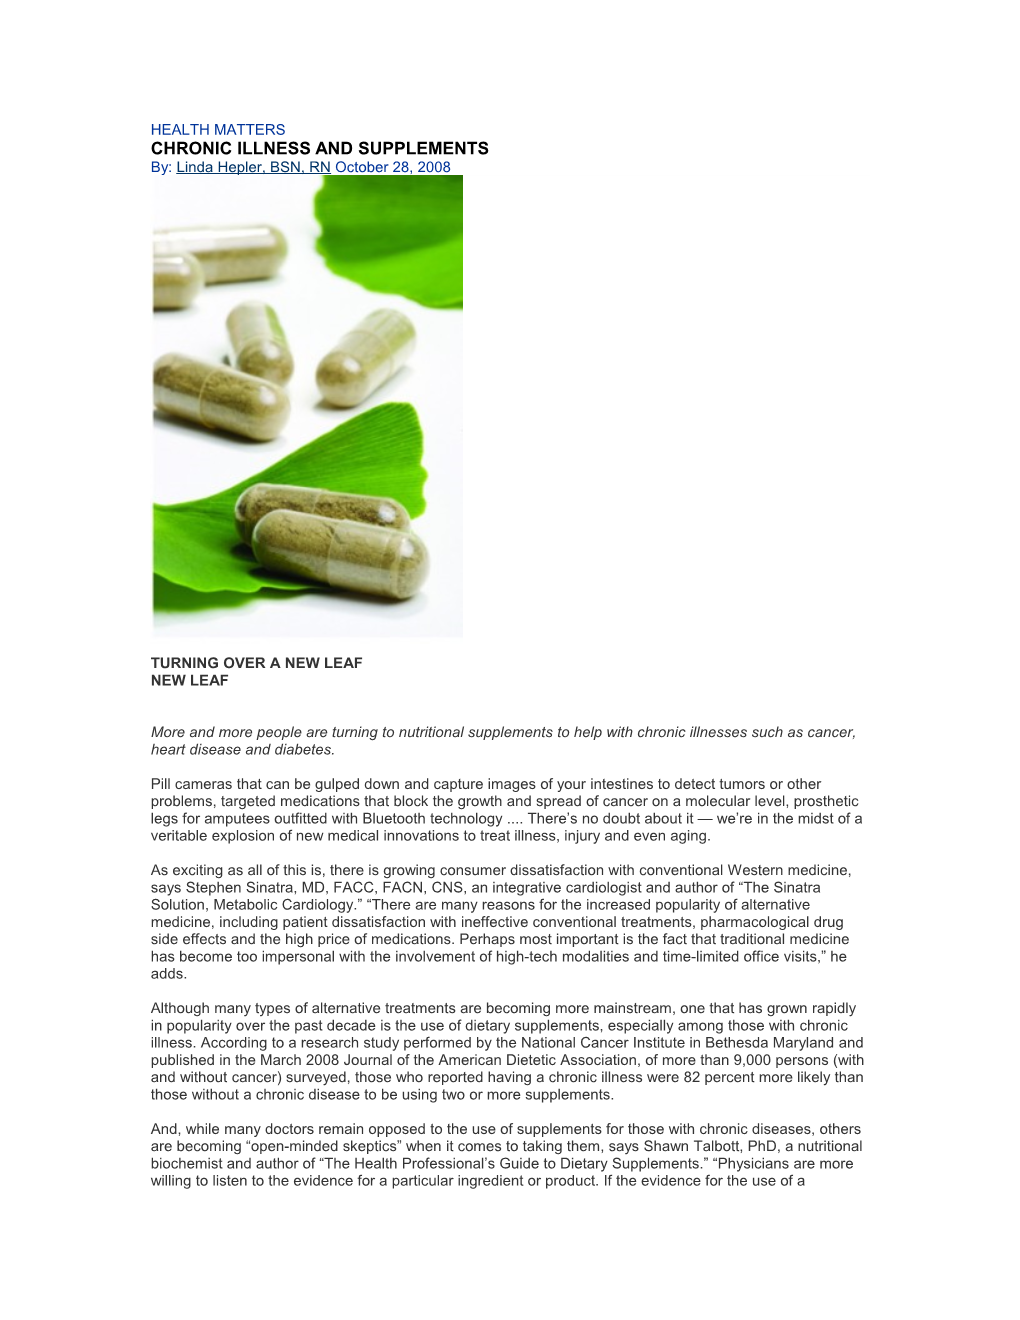 Chronic Illness and Supplements